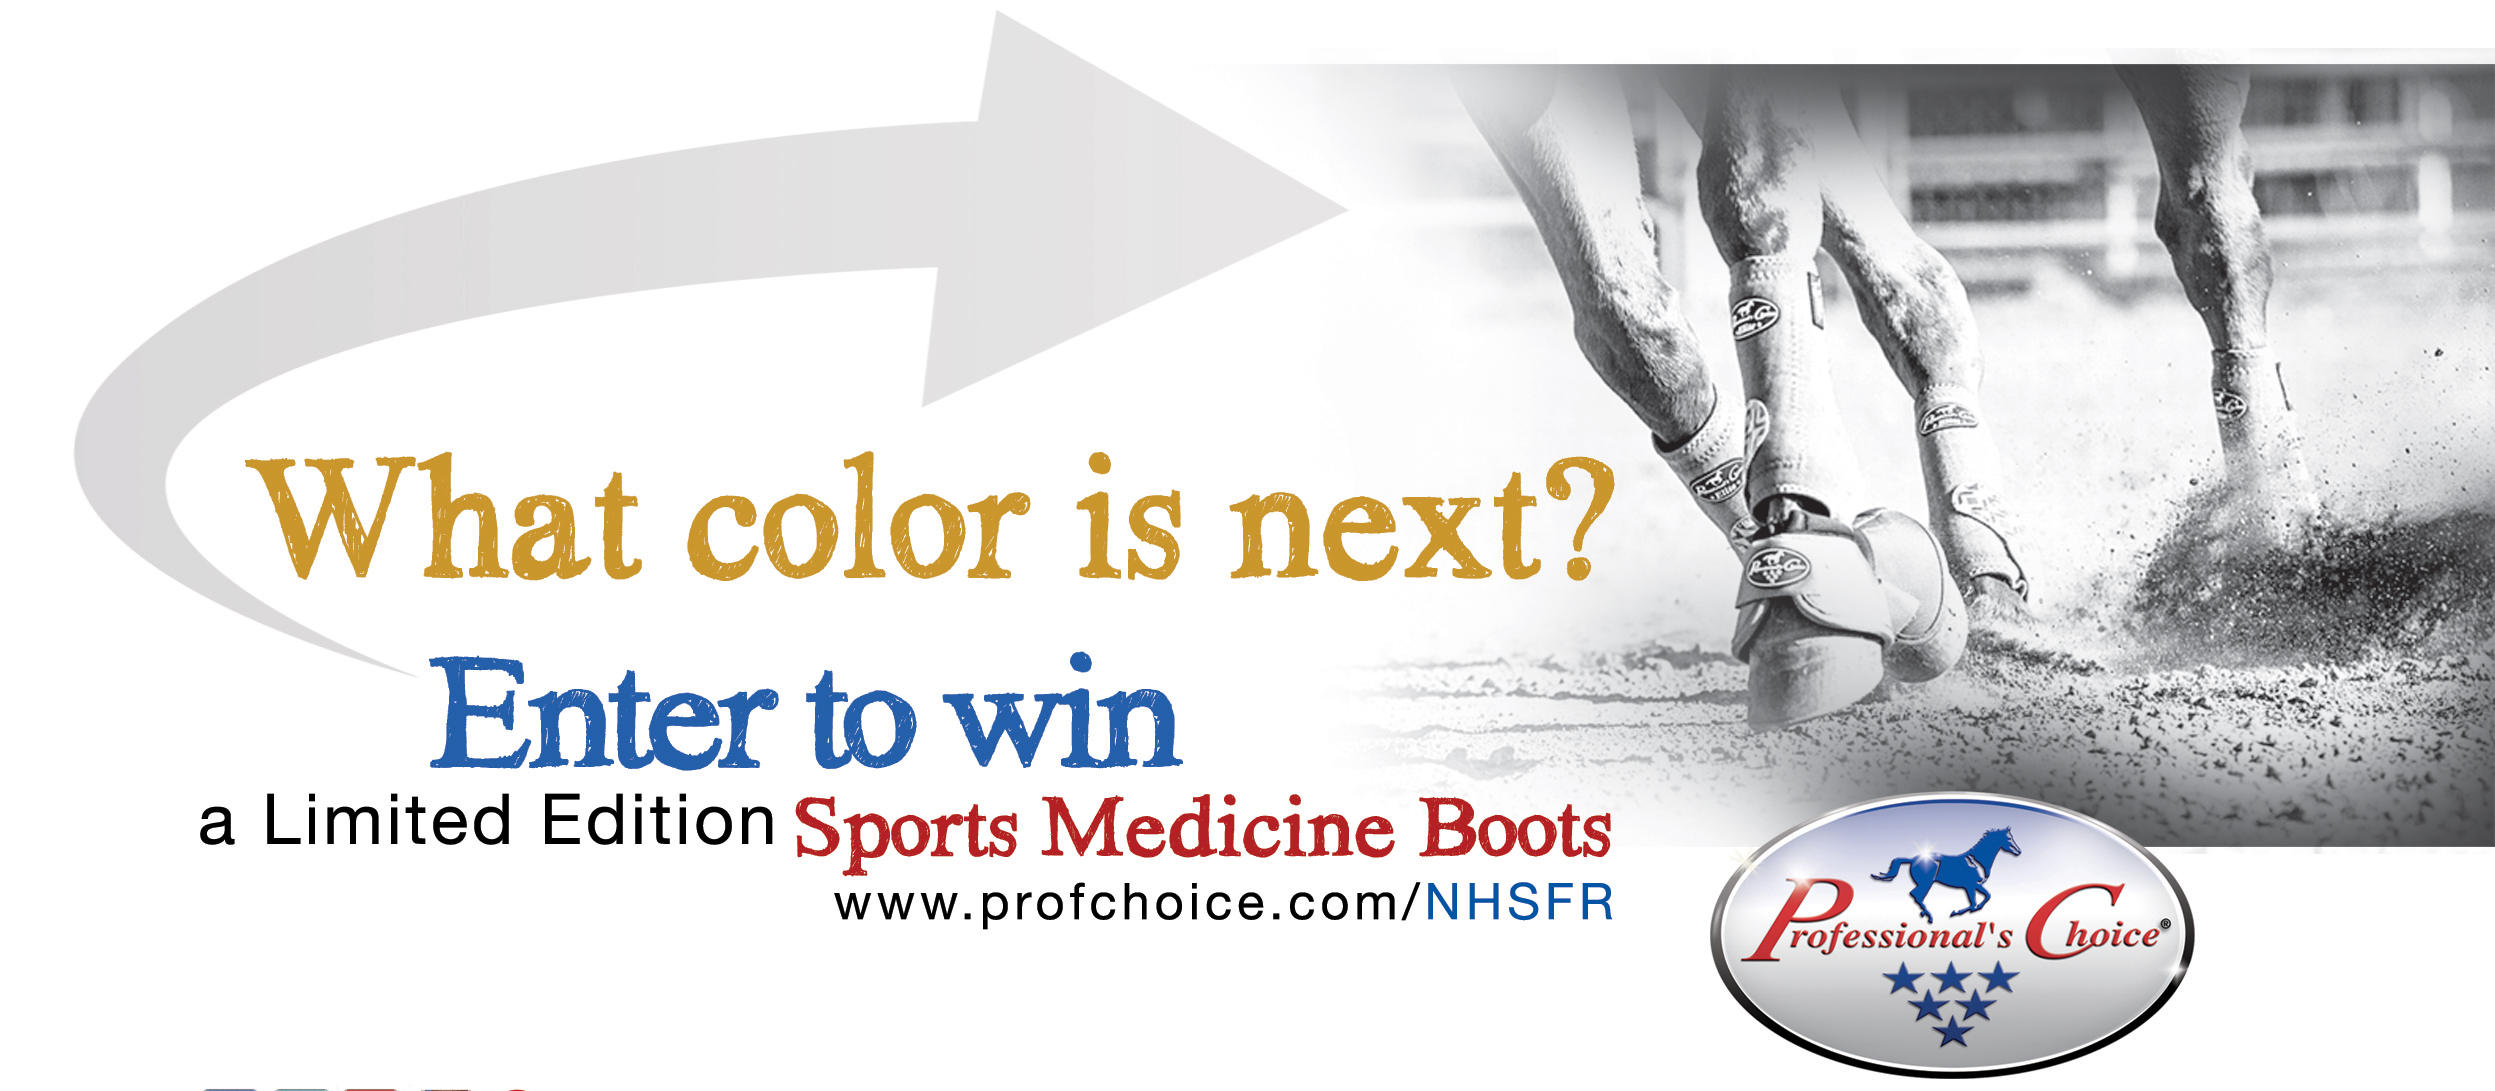 Enter to Win a Limited Edition Sports Medicine Boot